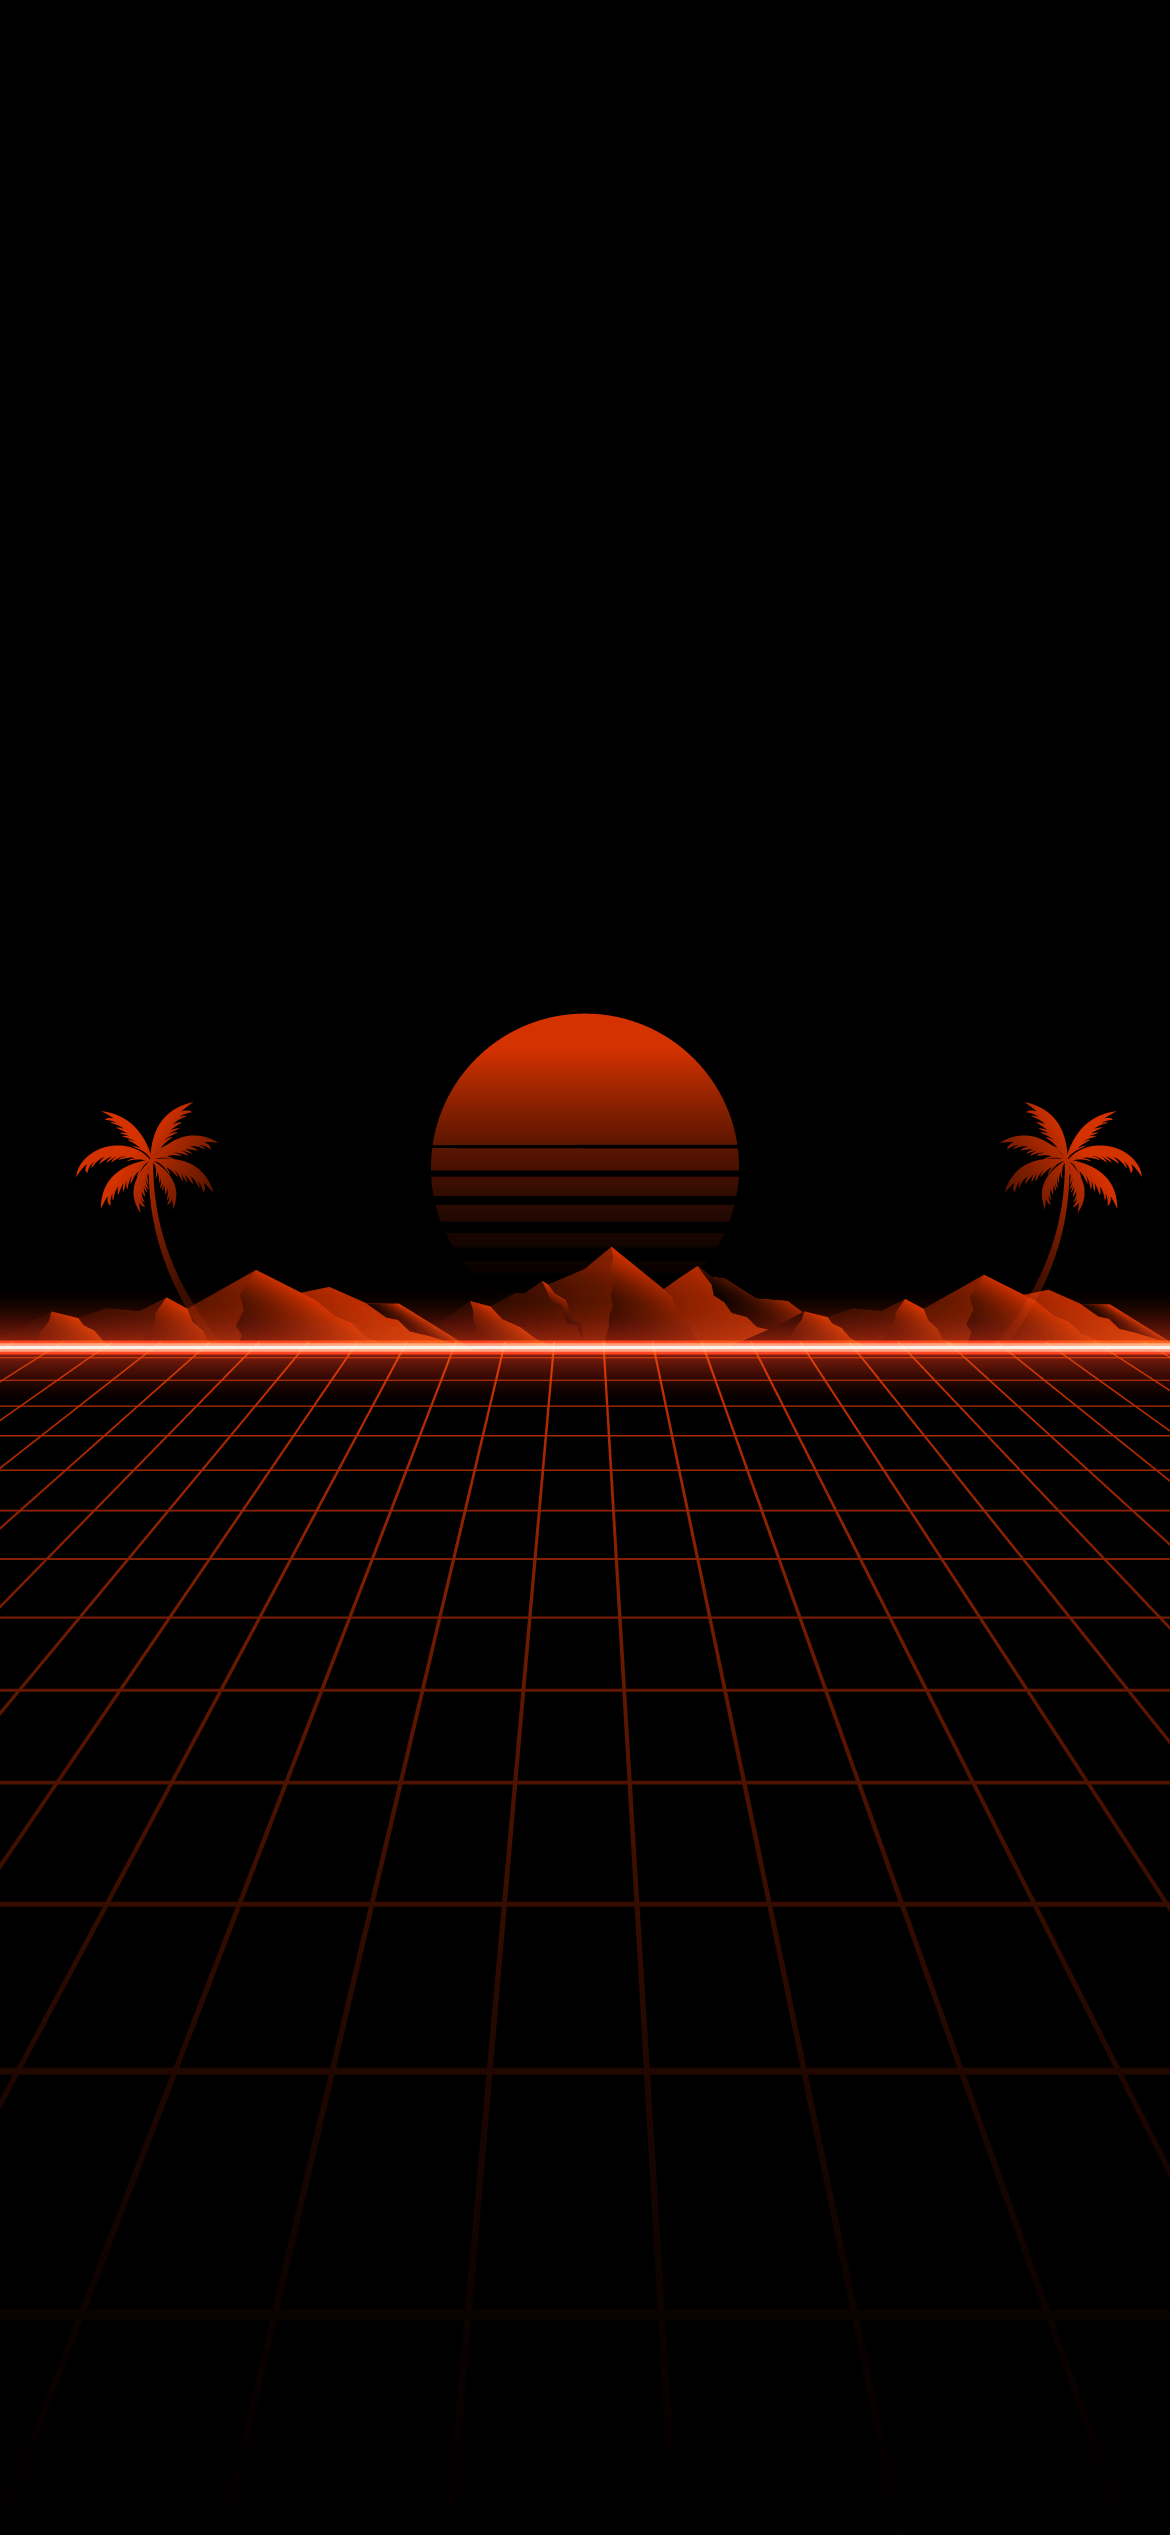 Aesthetic wallpaper for phone with retro wave. - Synthwave